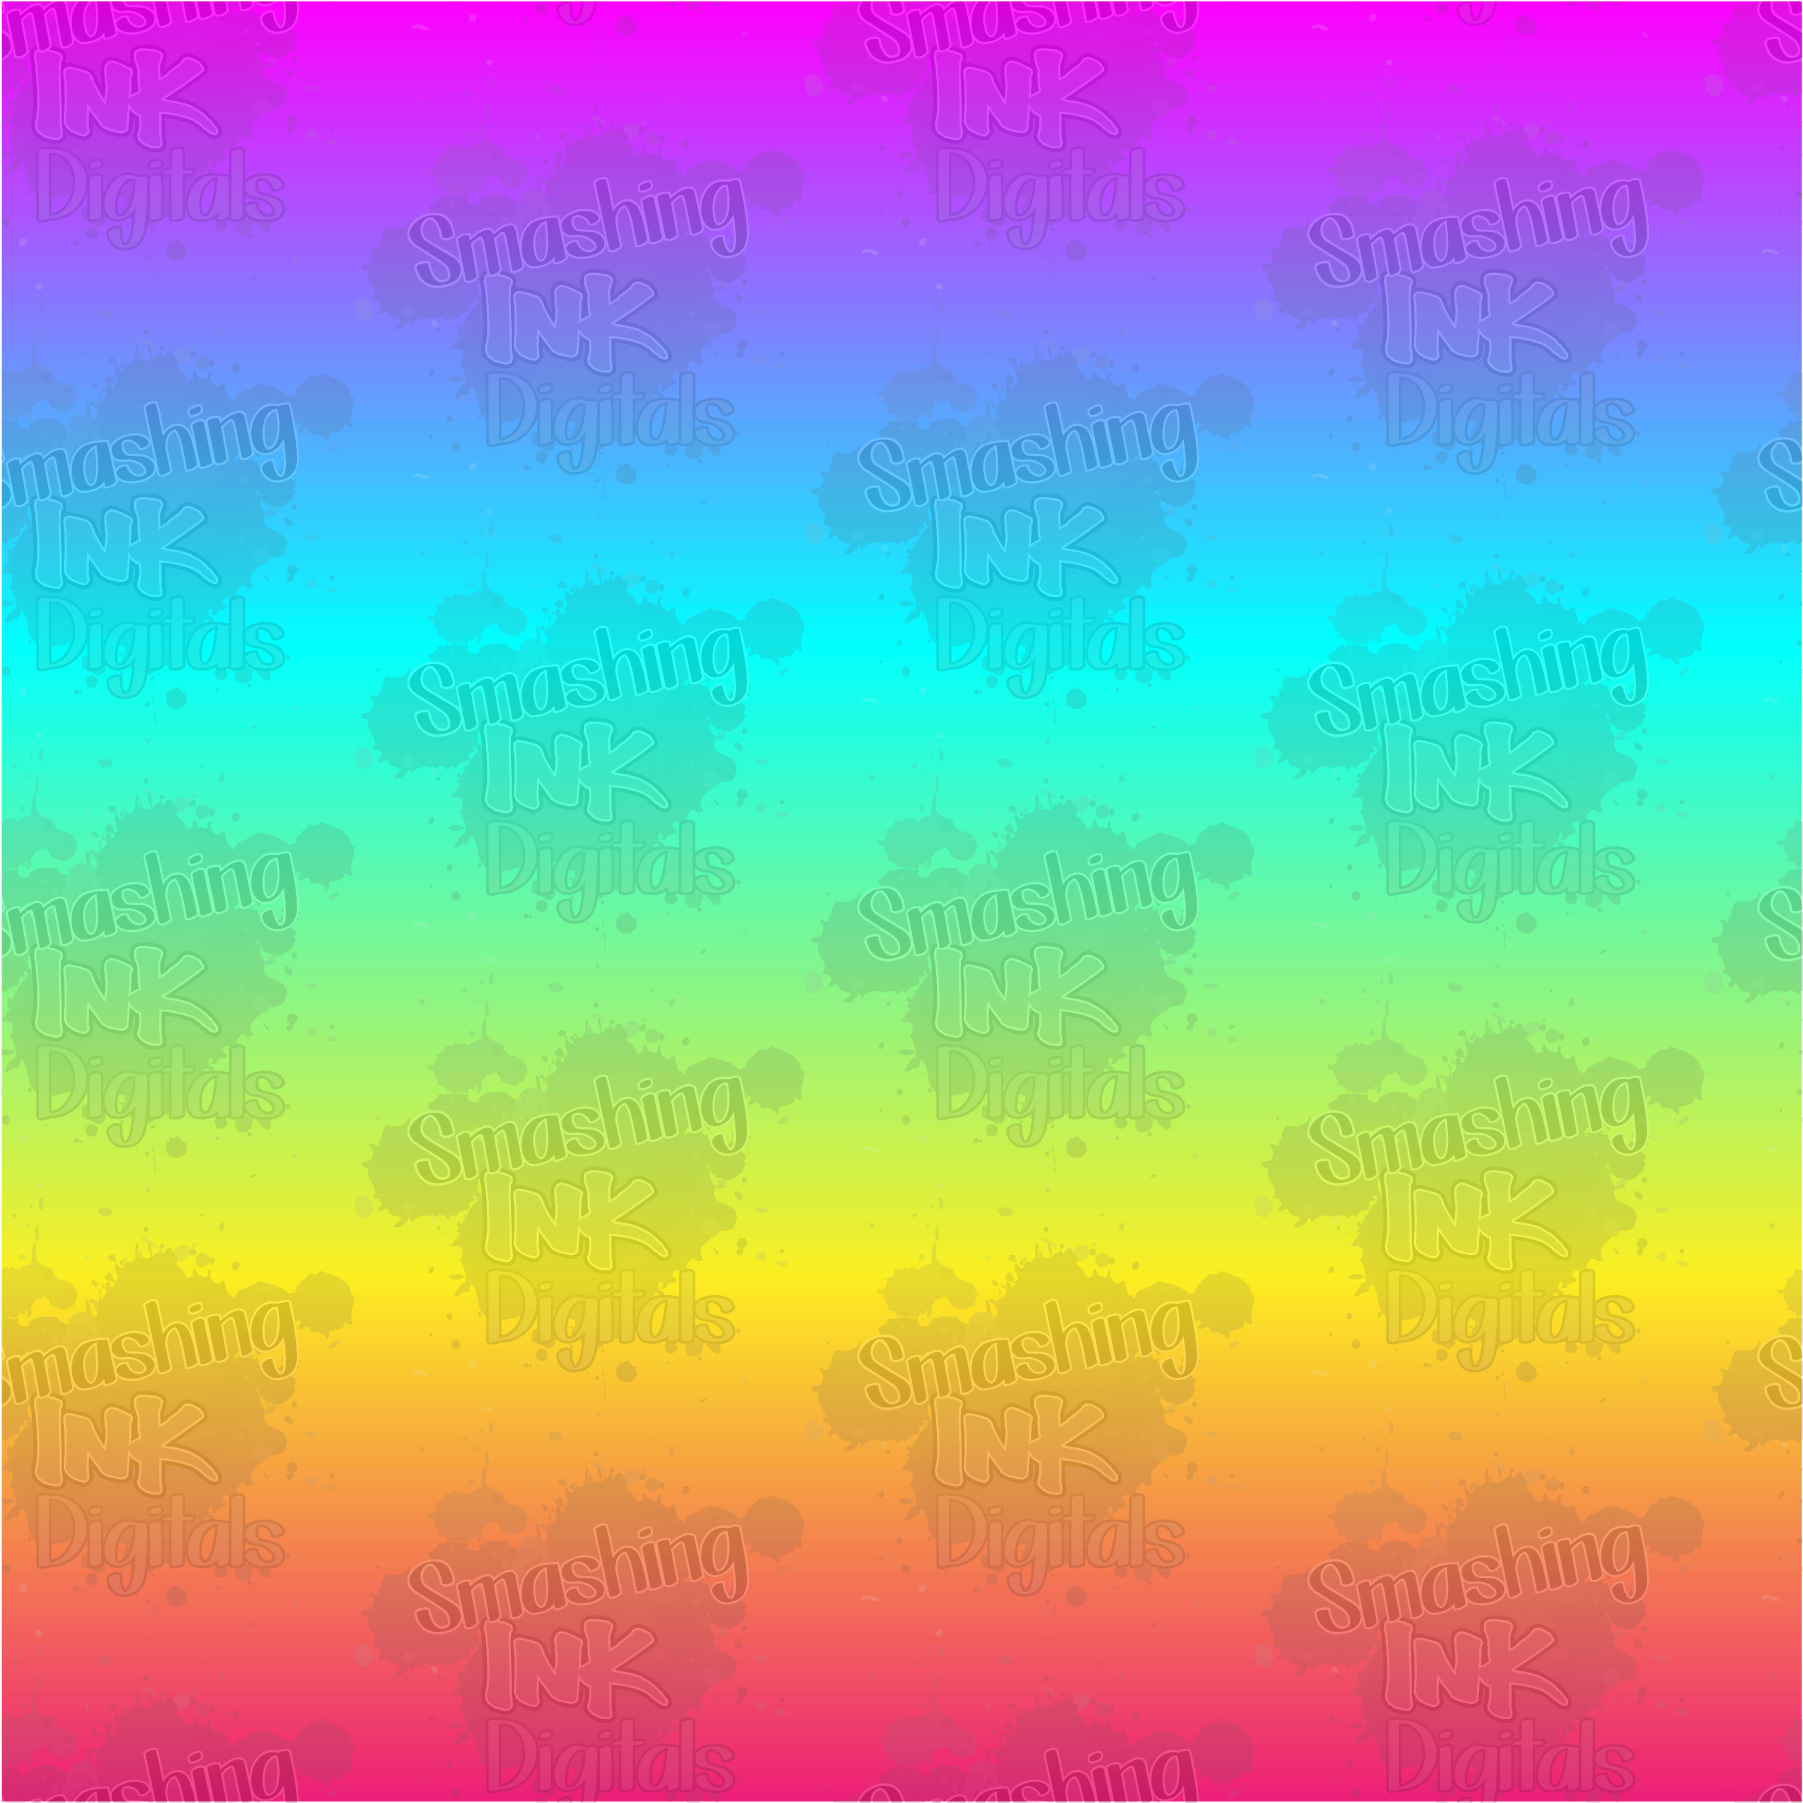 Rainbow Papers, Watercolor Rainbow, Glitter Rainbow Paper, Sparkle, Rainbow  Wallpapers, Rainbow Background, Colorful, Rainbow Backdrop 